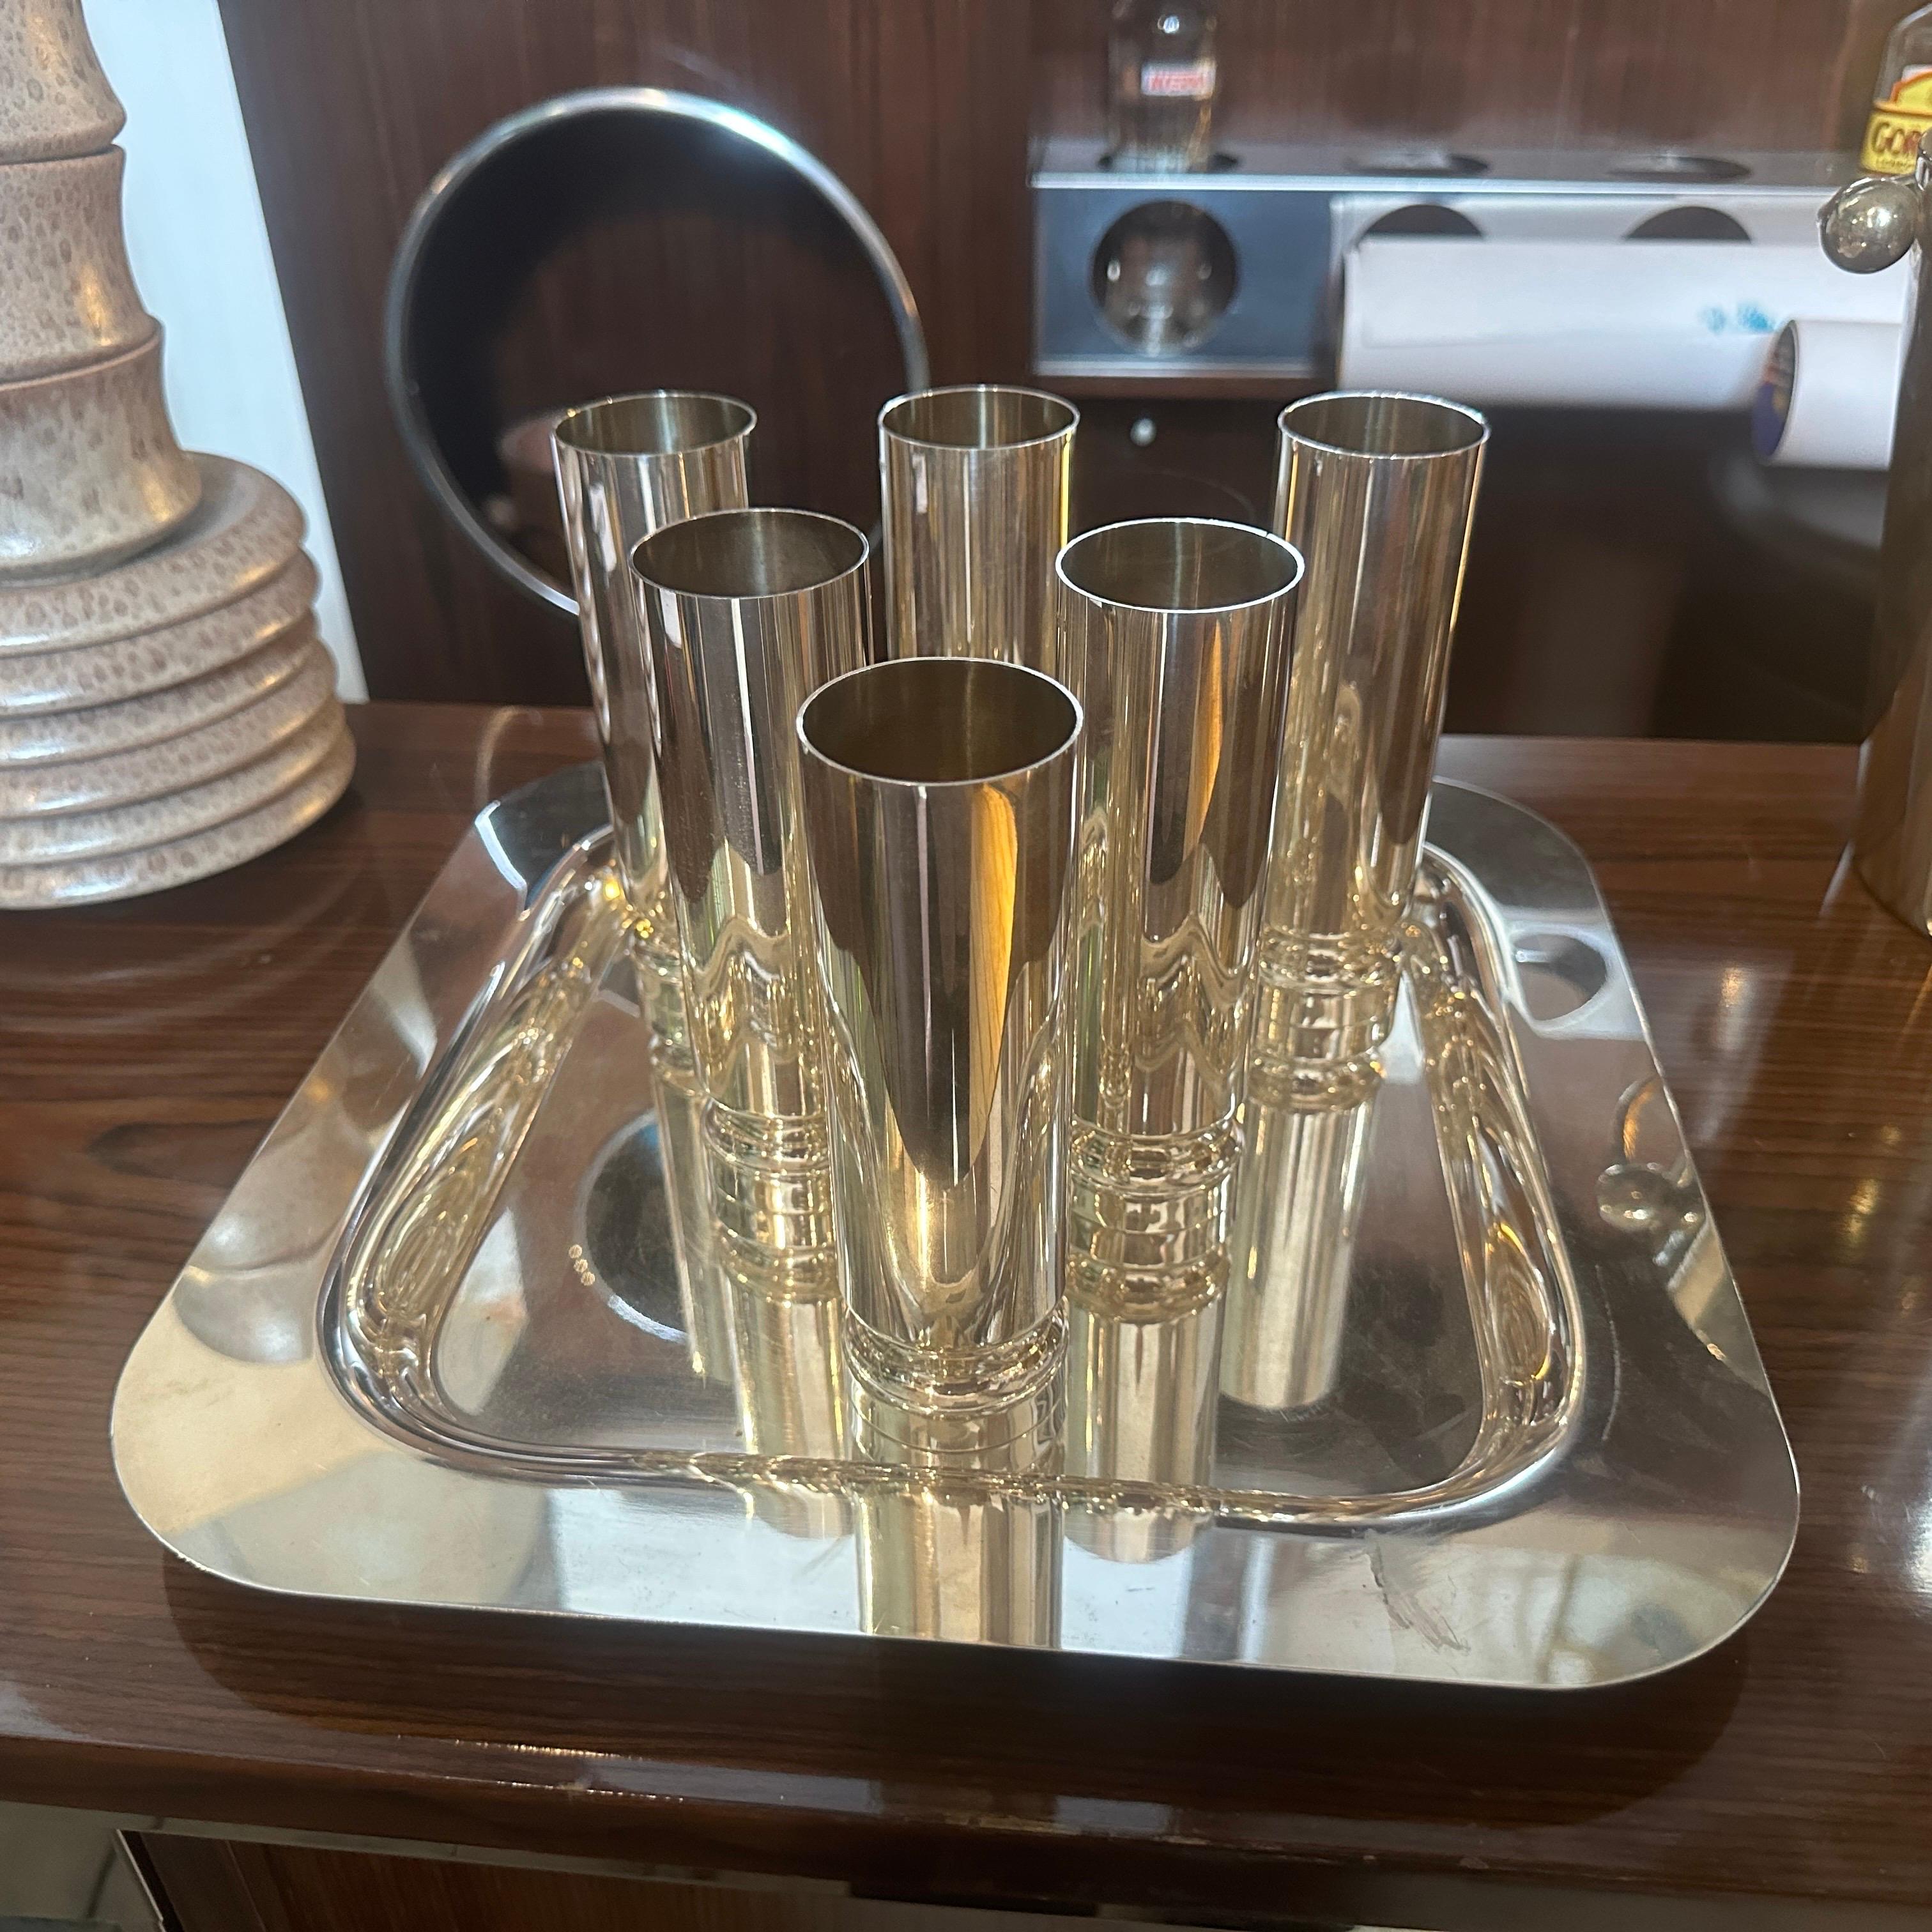 A high-quality silver-plated tray and flutes designed and manufactured in Italy in the Eighties by Disatron Silver, they are in original very good condition. The height of the flutes is 16 cm, and they have the original label on the bottom. The